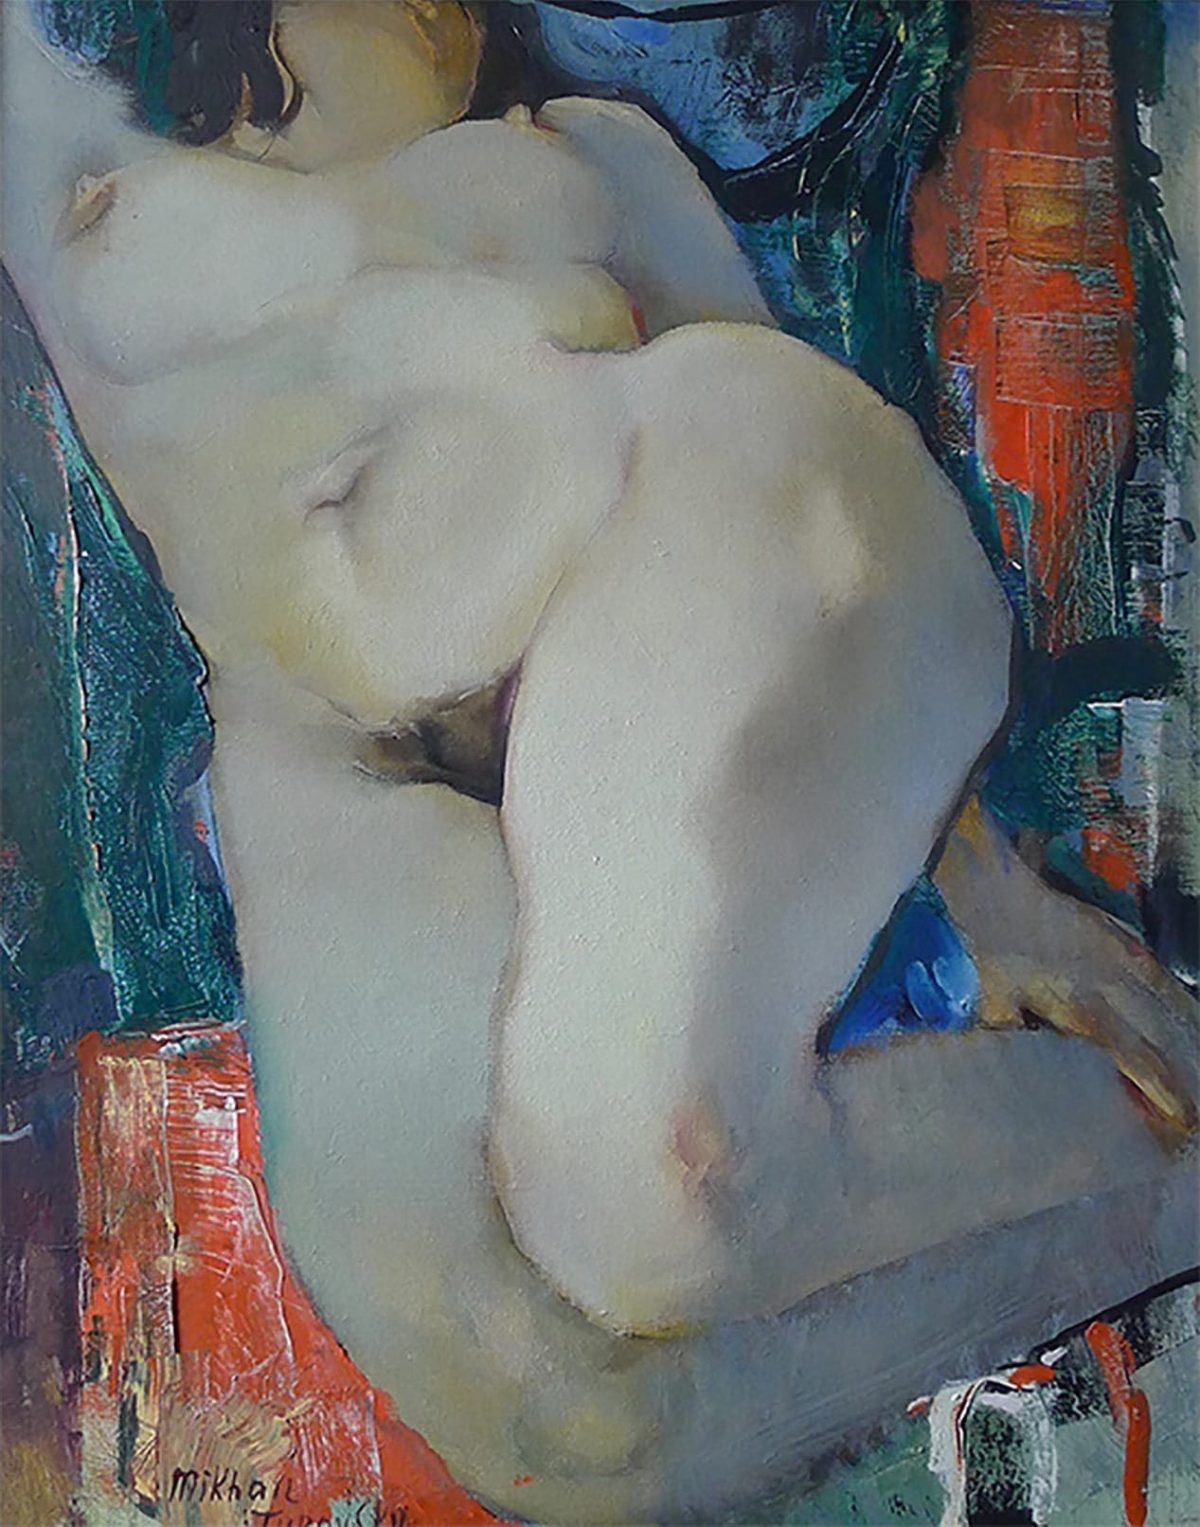 Nudity in art: modern & contemporary nudes paintings